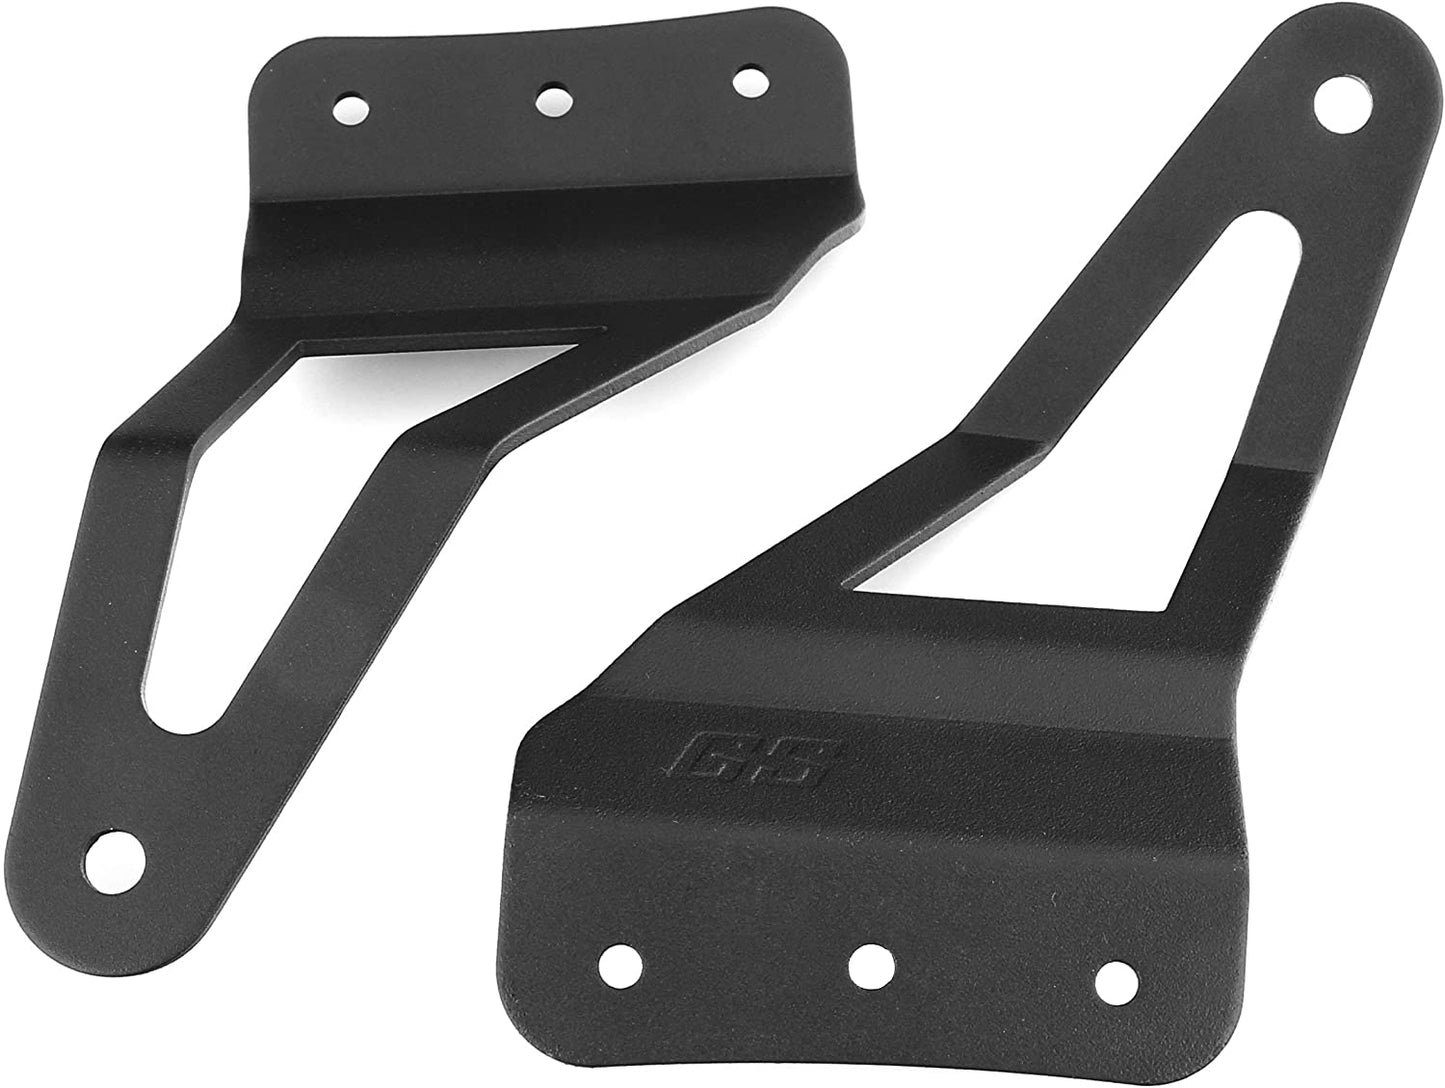 GS Power LED Light Bar Brackets (Choices of 50 | 52 | 54”) Mount Offroad Lightbar at Upper Windshield. Compatible with 2007-2013 Chevy Chevrolet Silverado Suburban Avalanche Tahoe GMC Yukon Sierra - (For 8 piece(s))